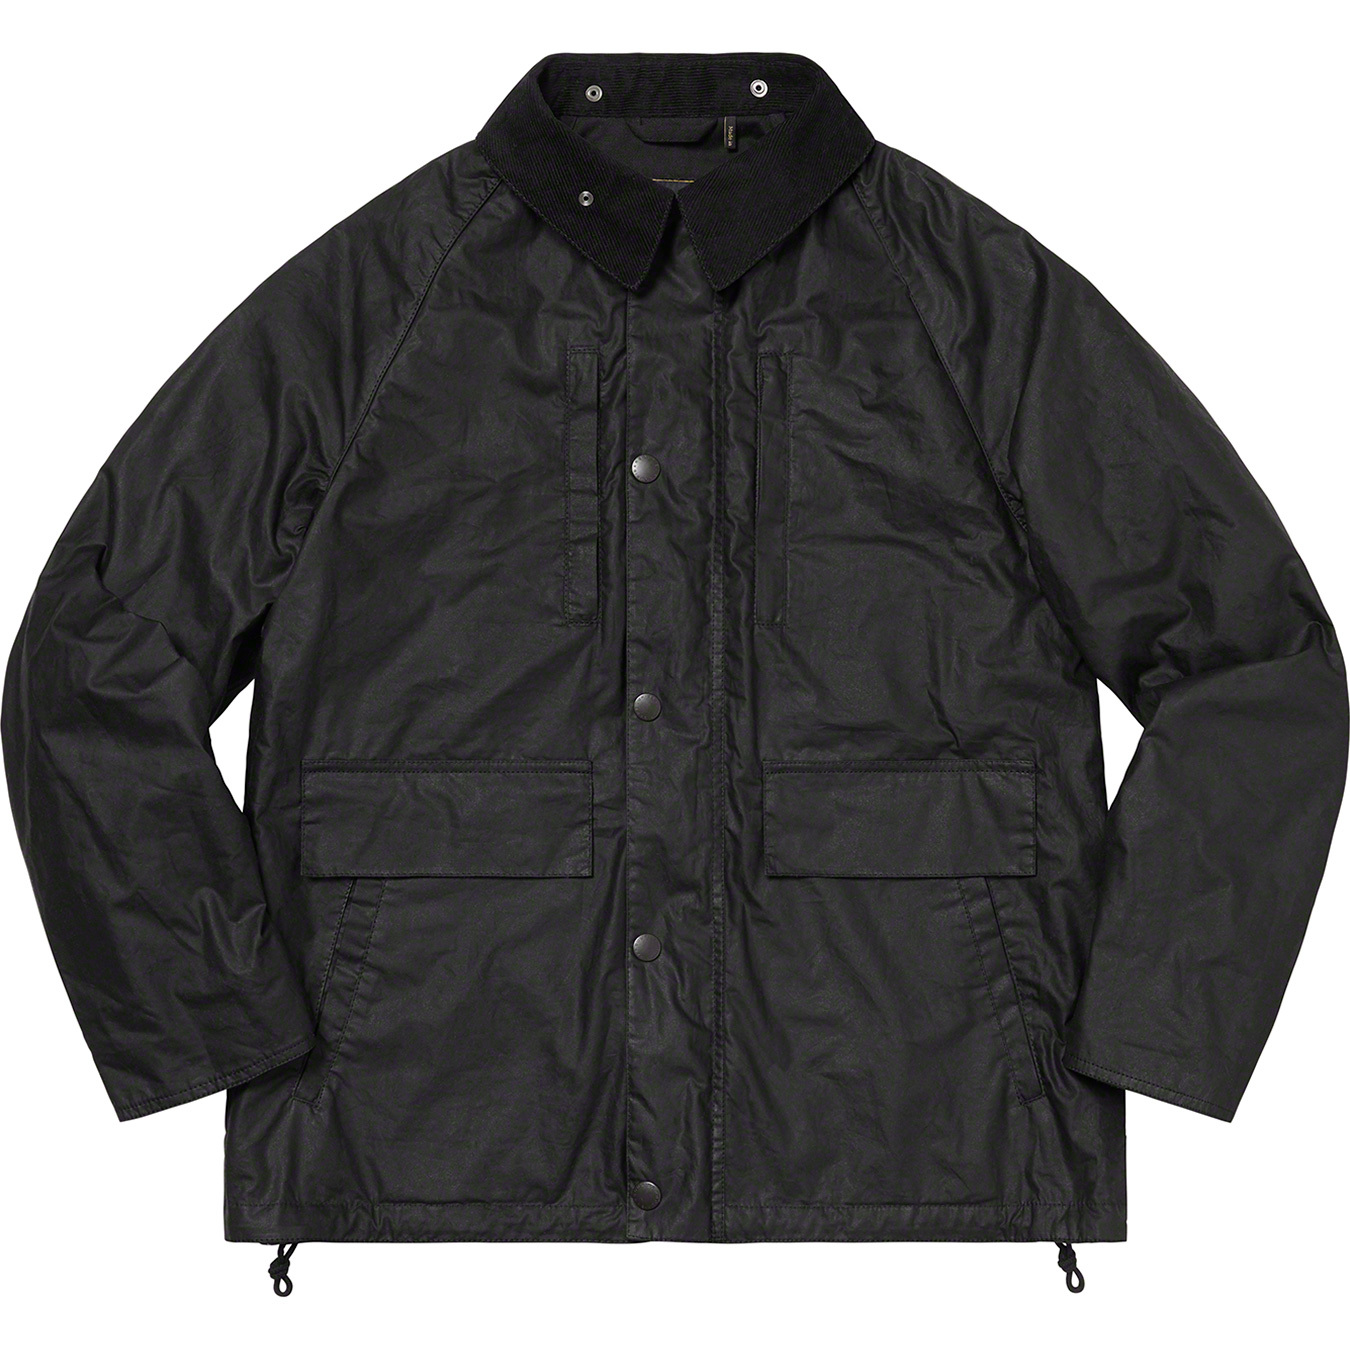 Supreme®/Barbour® Lightweight Waxed Cotton Field Jacket - Supreme 